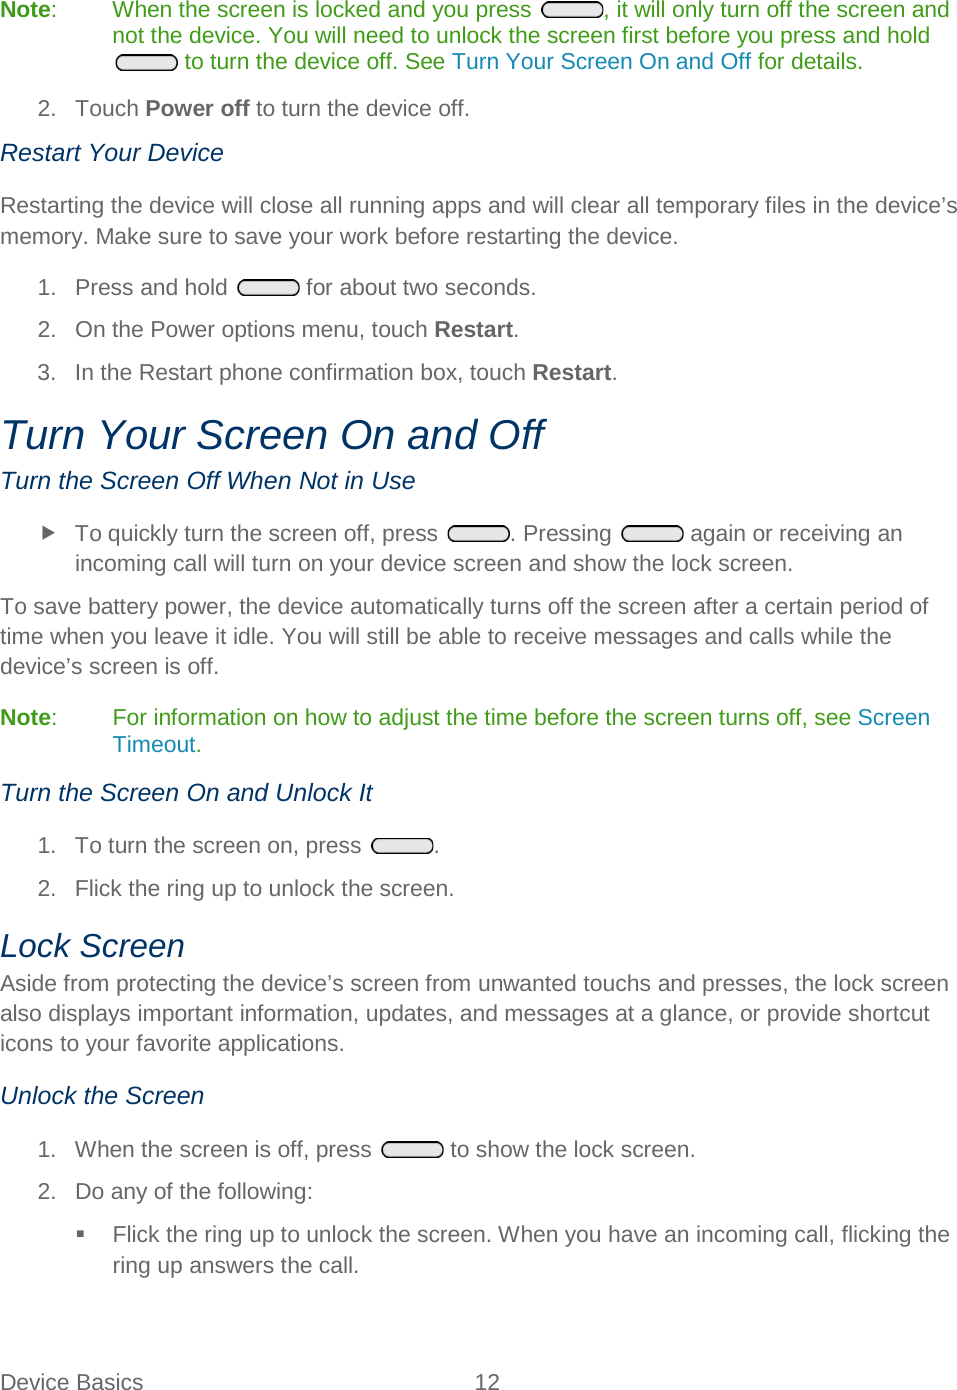  Device Basics 12   Note:  When the screen is locked and you press , it will only turn off the screen and not the device. You will need to unlock the screen first before you press and hold  to turn the device off. See Turn Your Screen On and Off for details. 2. Touch Power off to turn the device off. Restart Your Device Restarting the device will close all running apps and will clear all temporary files in the device’s memory. Make sure to save your work before restarting the device. 1.  Press and hold   for about two seconds. 2. On the Power options menu, touch Restart. 3. In the Restart phone confirmation box, touch Restart. Turn Your Screen On and Off Turn the Screen Off When Not in Use  To quickly turn the screen off, press . Pressing   again or receiving an incoming call will turn on your device screen and show the lock screen. To save battery power, the device automatically turns off the screen after a certain period of time when you leave it idle. You will still be able to receive messages and calls while the device’s screen is off. Note:  For information on how to adjust the time before the screen turns off, see Screen Timeout.  Turn the Screen On and Unlock It 1. To turn the screen on, press .  2. Flick the ring up to unlock the screen. Lock Screen Aside from protecting the device’s screen from unwanted touchs and presses, the lock screen also displays important information, updates, and messages at a glance, or provide shortcut icons to your favorite applications. Unlock the Screen 1. When the screen is off, press   to show the lock screen. 2. Do any of the following:  Flick the ring up to unlock the screen. When you have an incoming call, flicking the ring up answers the call. 